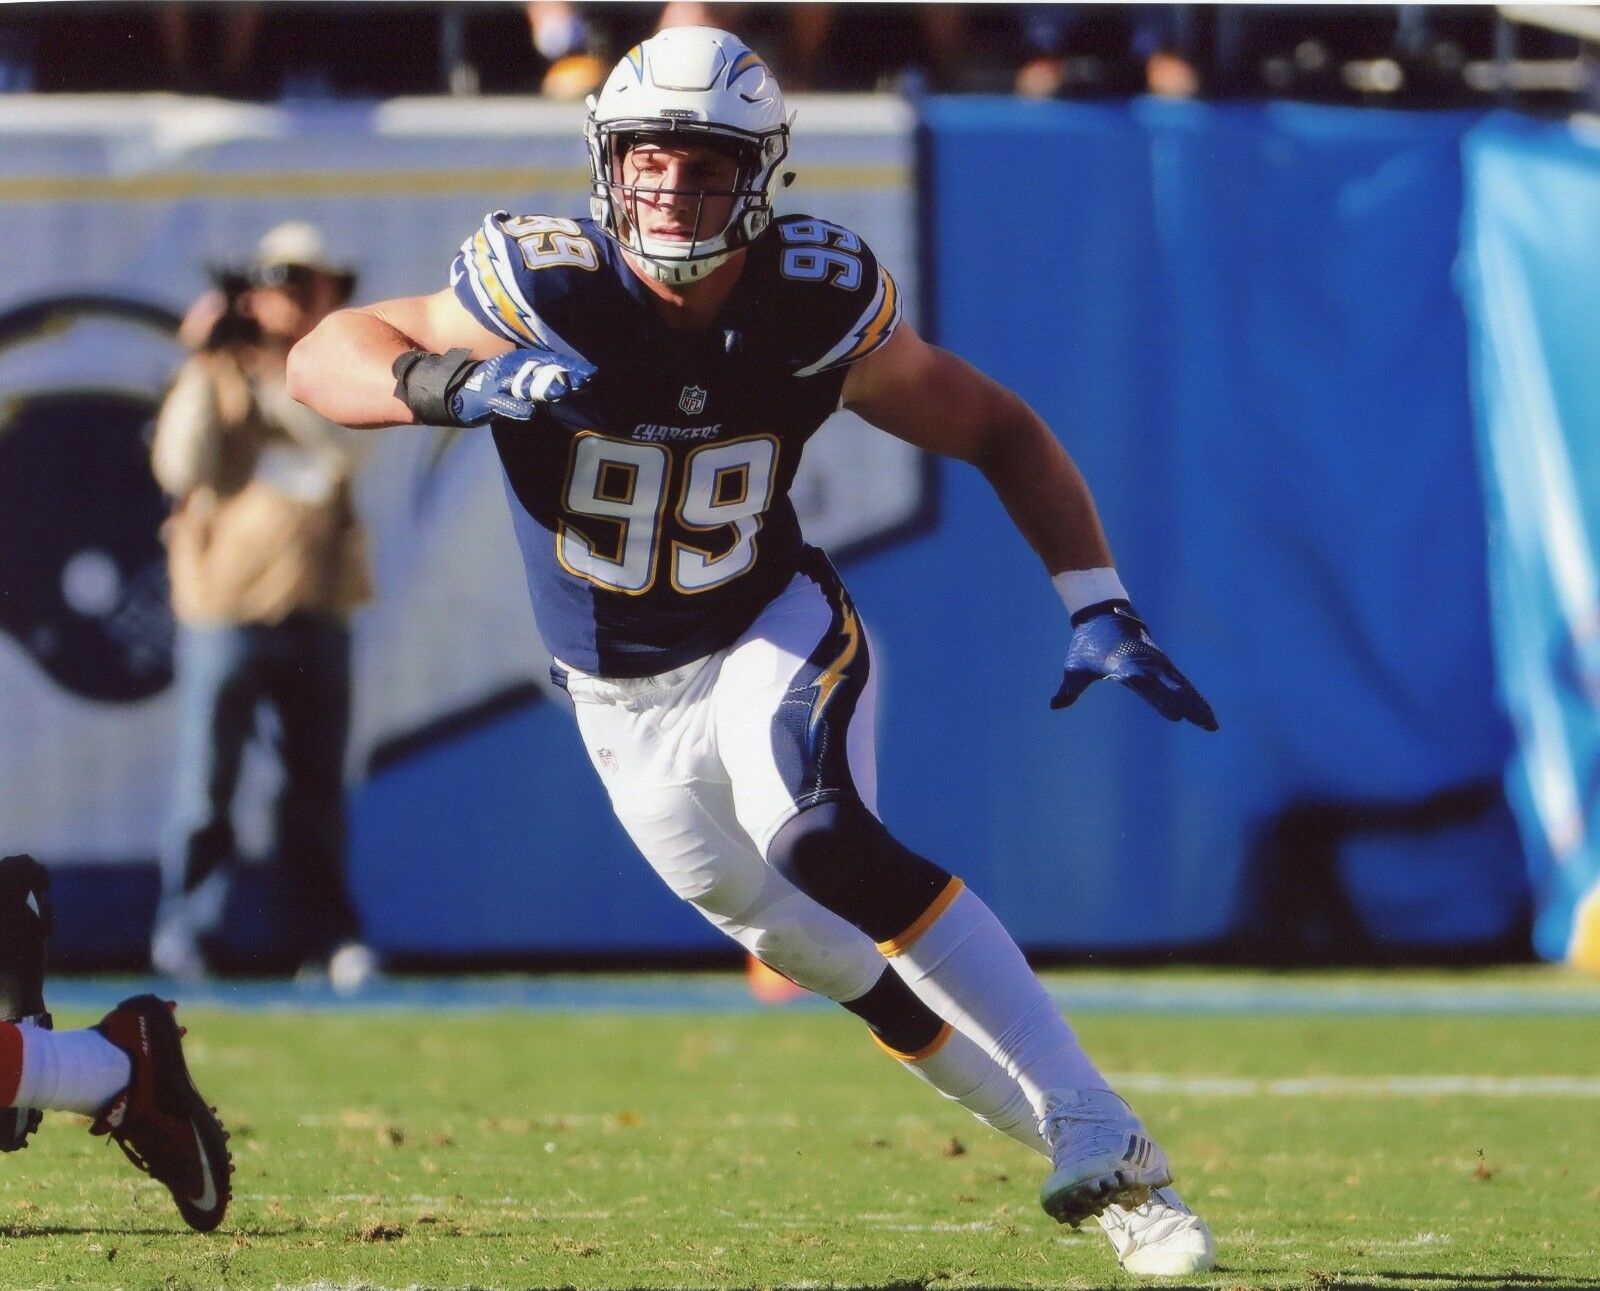 Joey Bosa Los Angeles Chargers 8x10 Sports Photo (jj)